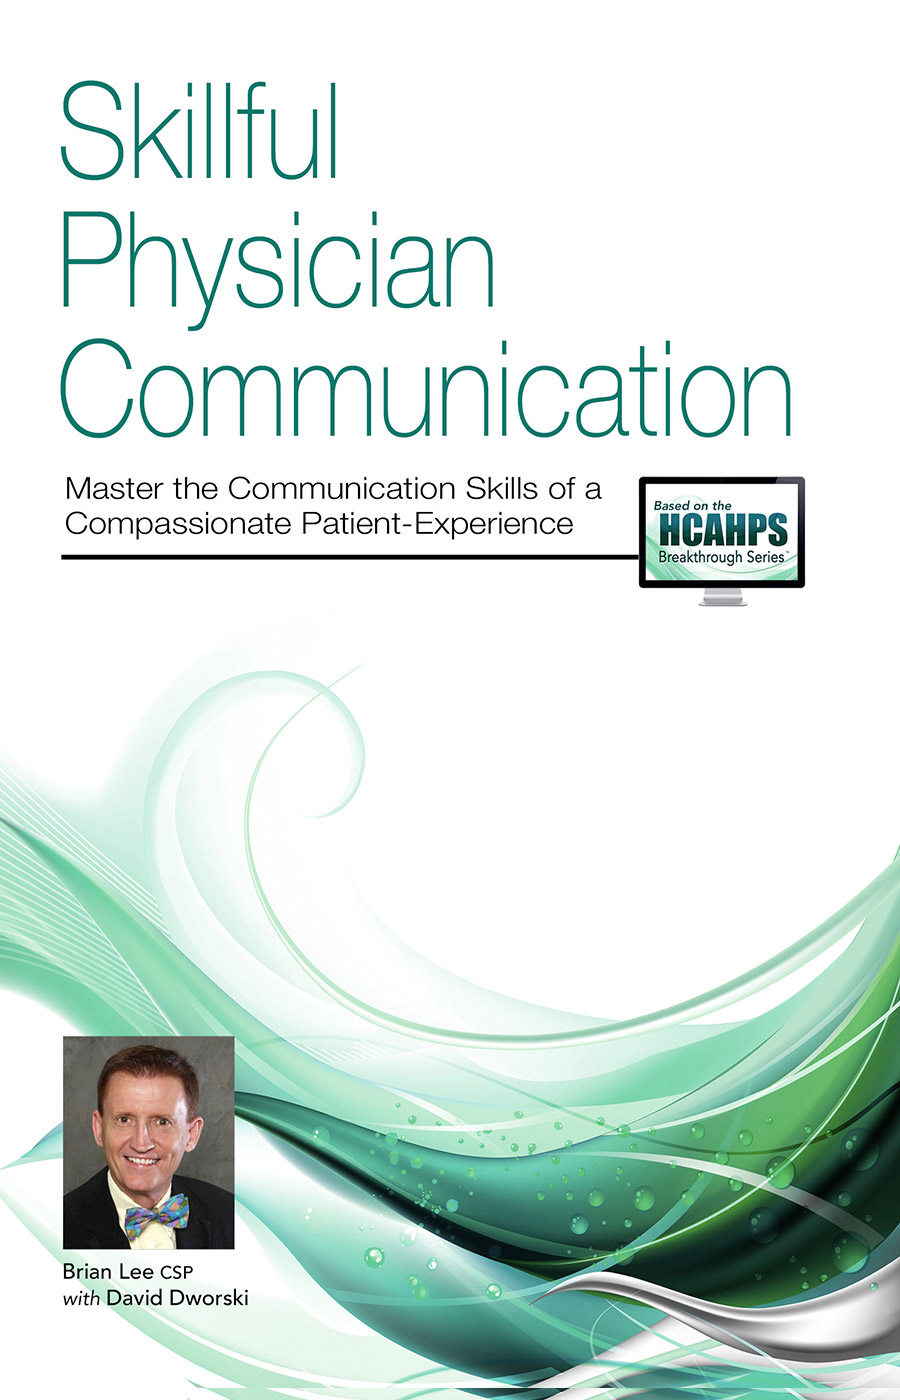 Rural Physician Communication